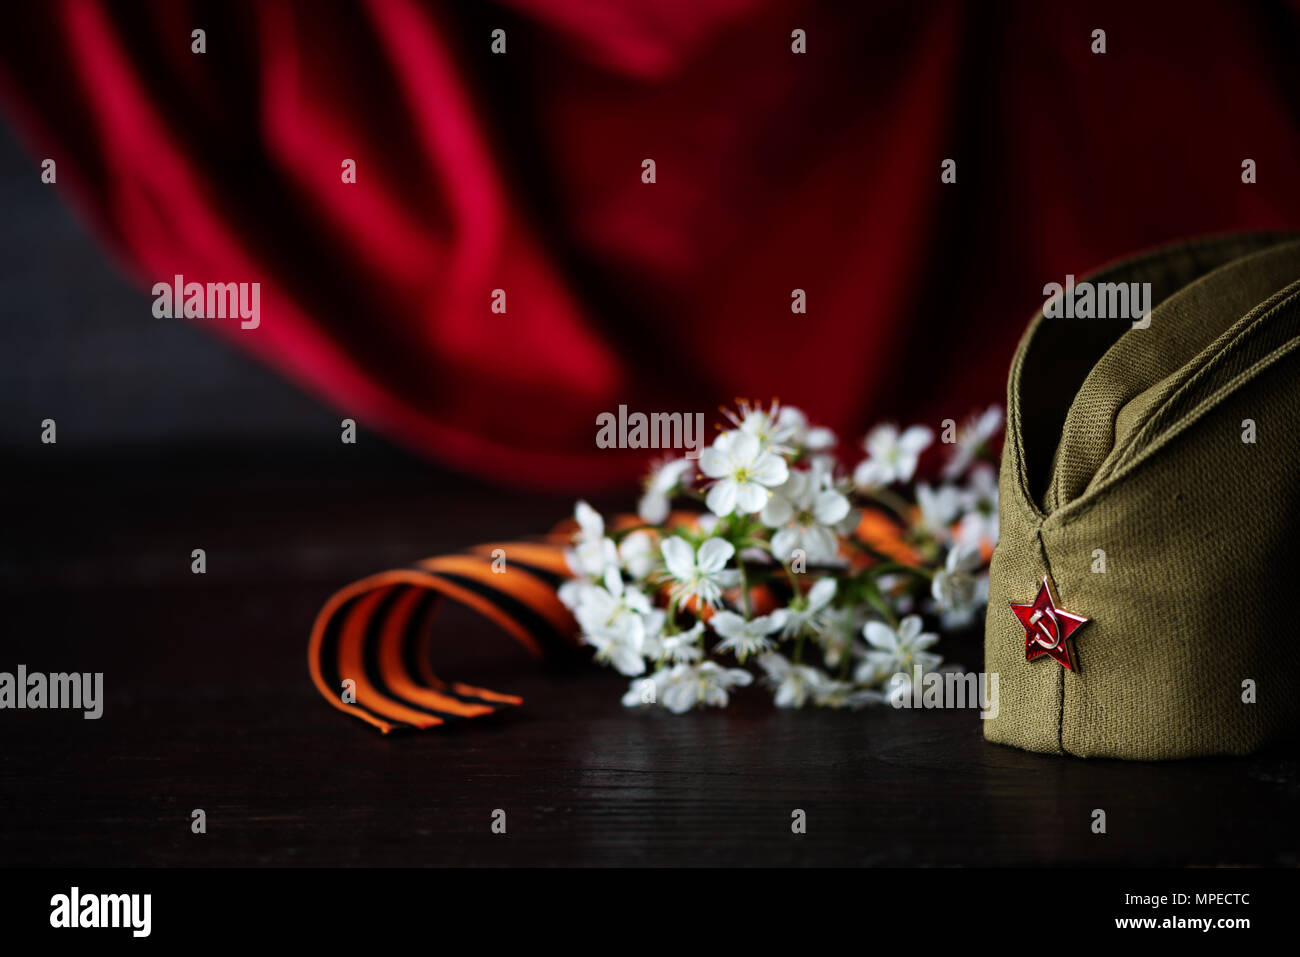 Concept, greeting card to the Victory Day. Soldier's cap with red star, cherry blossom and guards ribbon on the background of the red standard Stock Photo